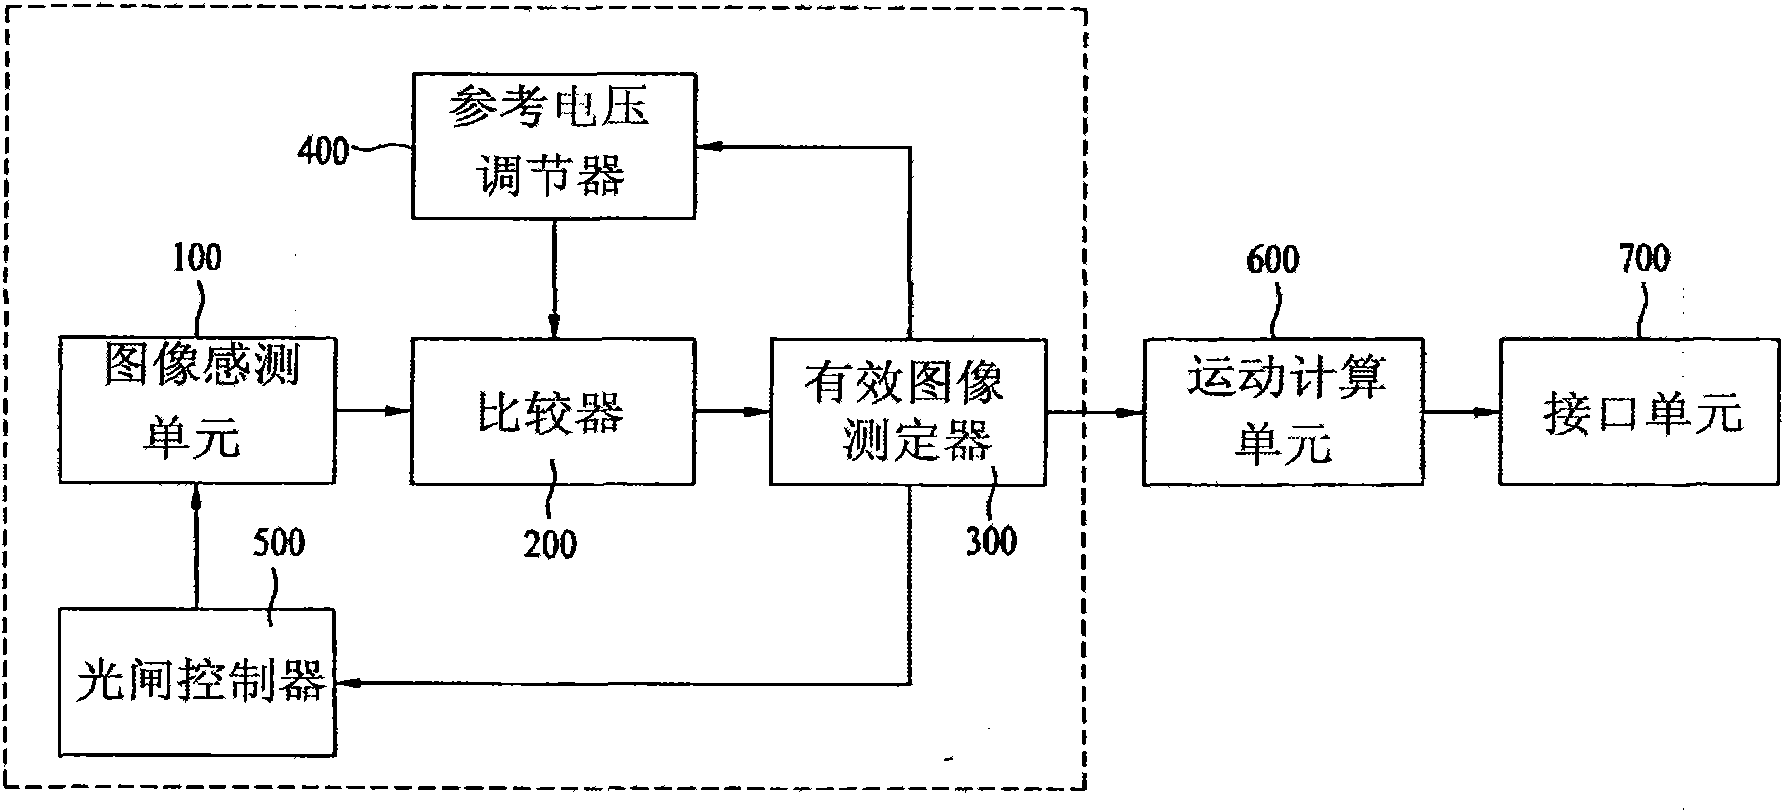 Low power image sensor adjusting reference voltage automatically and optical pointing device comprising the same